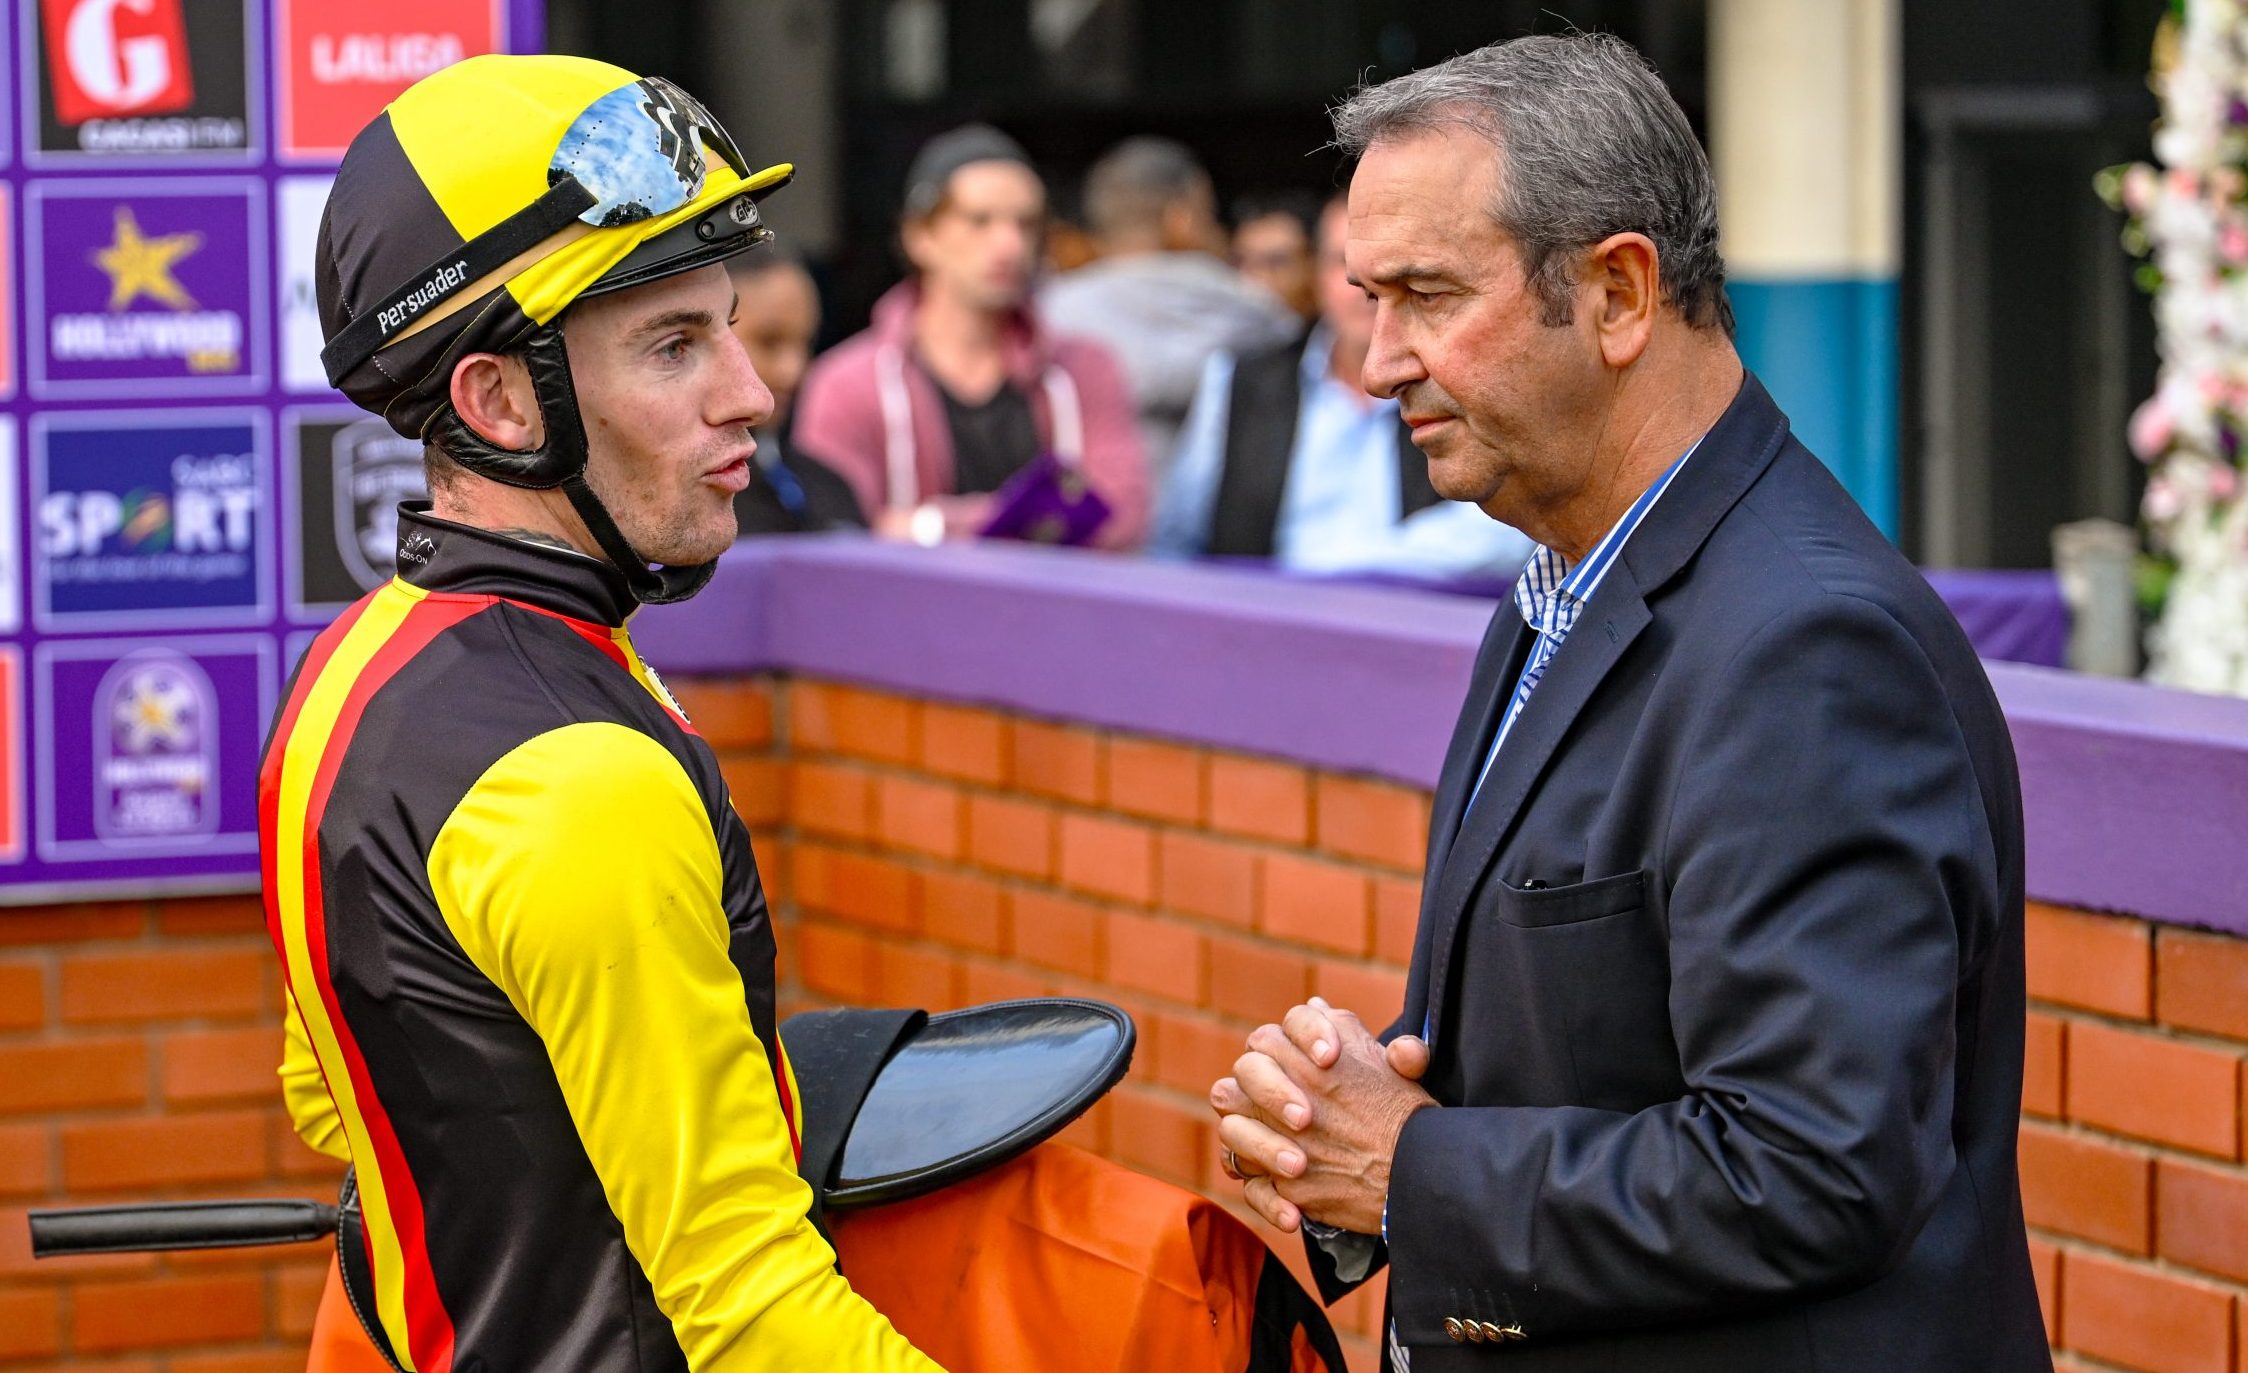 Follow Craig Zackey and Dean Kannemeyer at Hollywoodbets Greyville today (Pic - Chase Liebenberg)